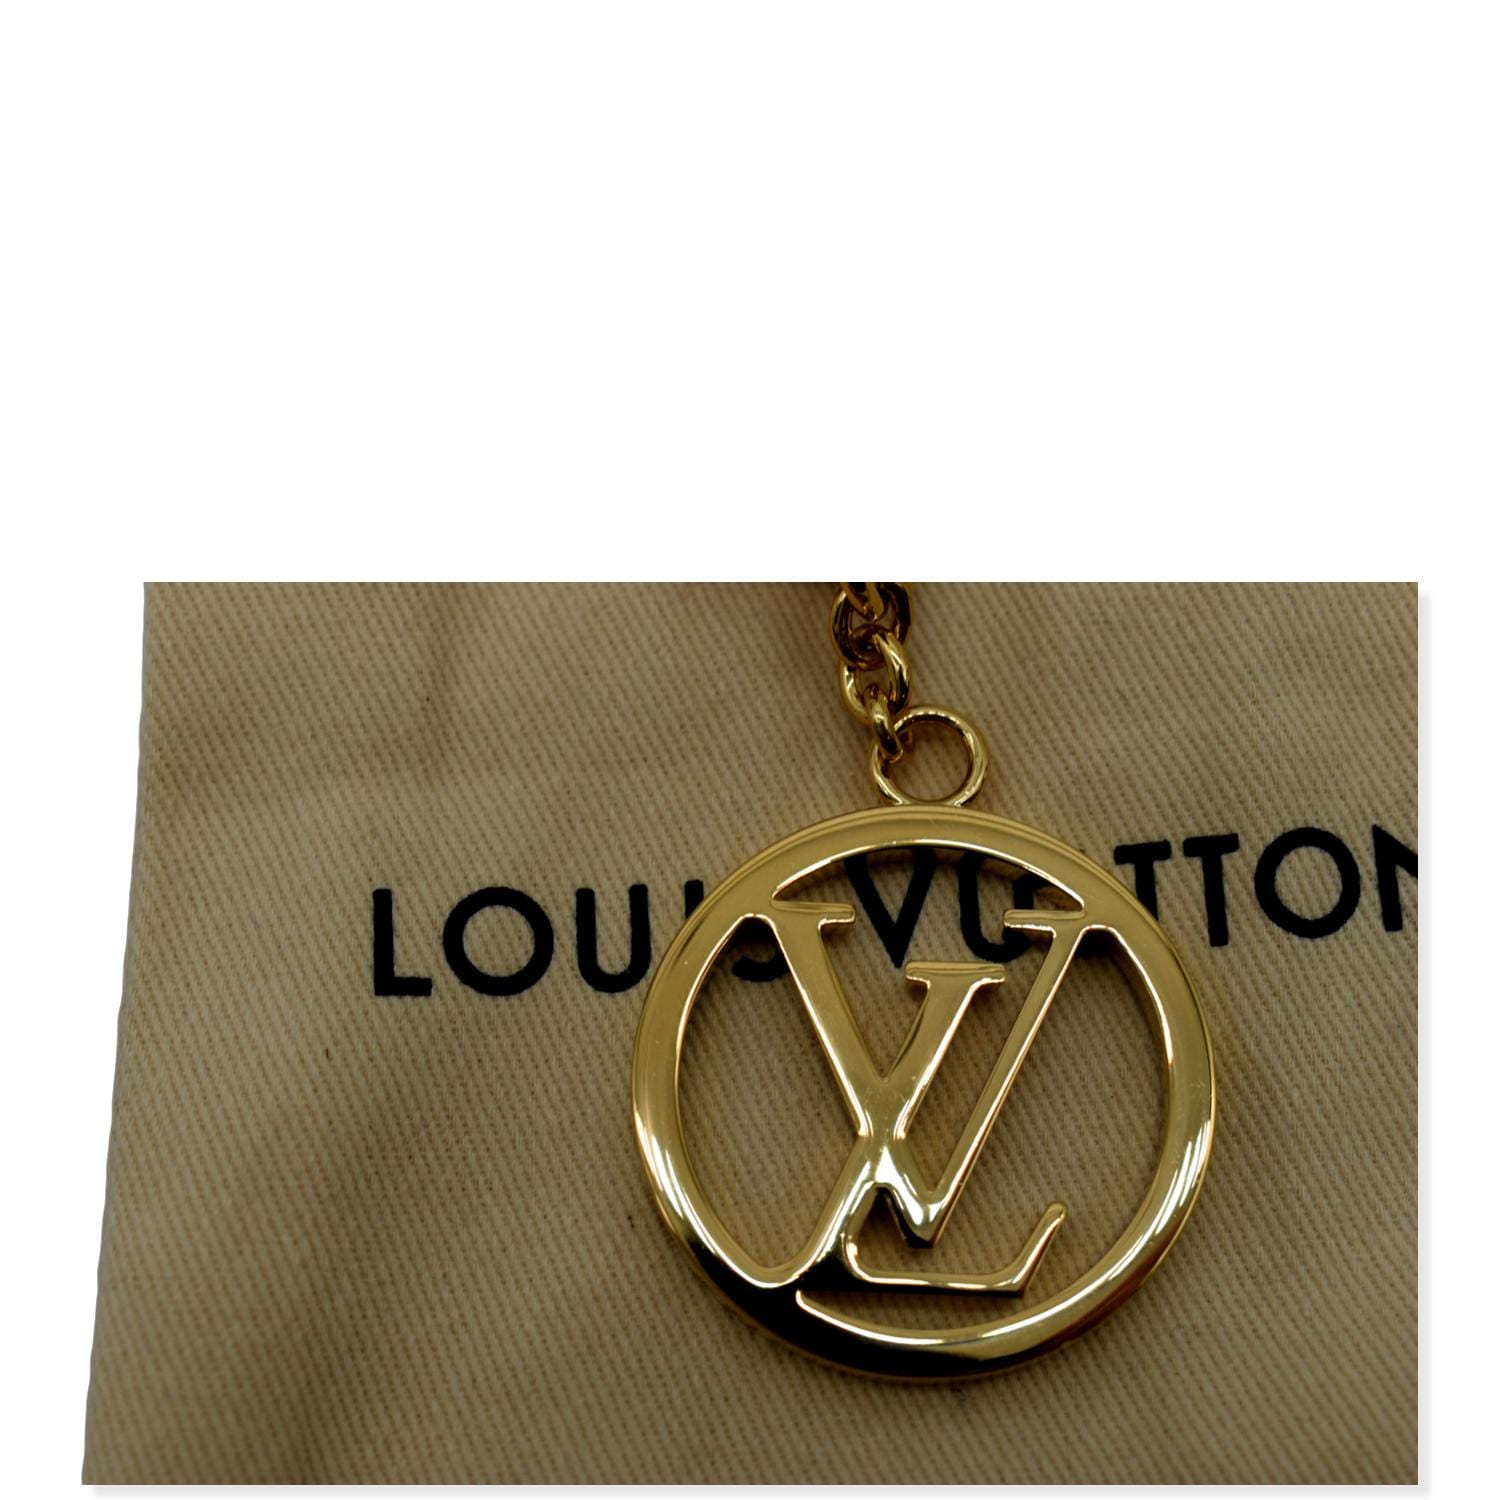 Louis Vuitton, Accessories, New Authentic Louis Vuitton Otter Lv Heart Key  Ring Bag Charm Wgold Hardware